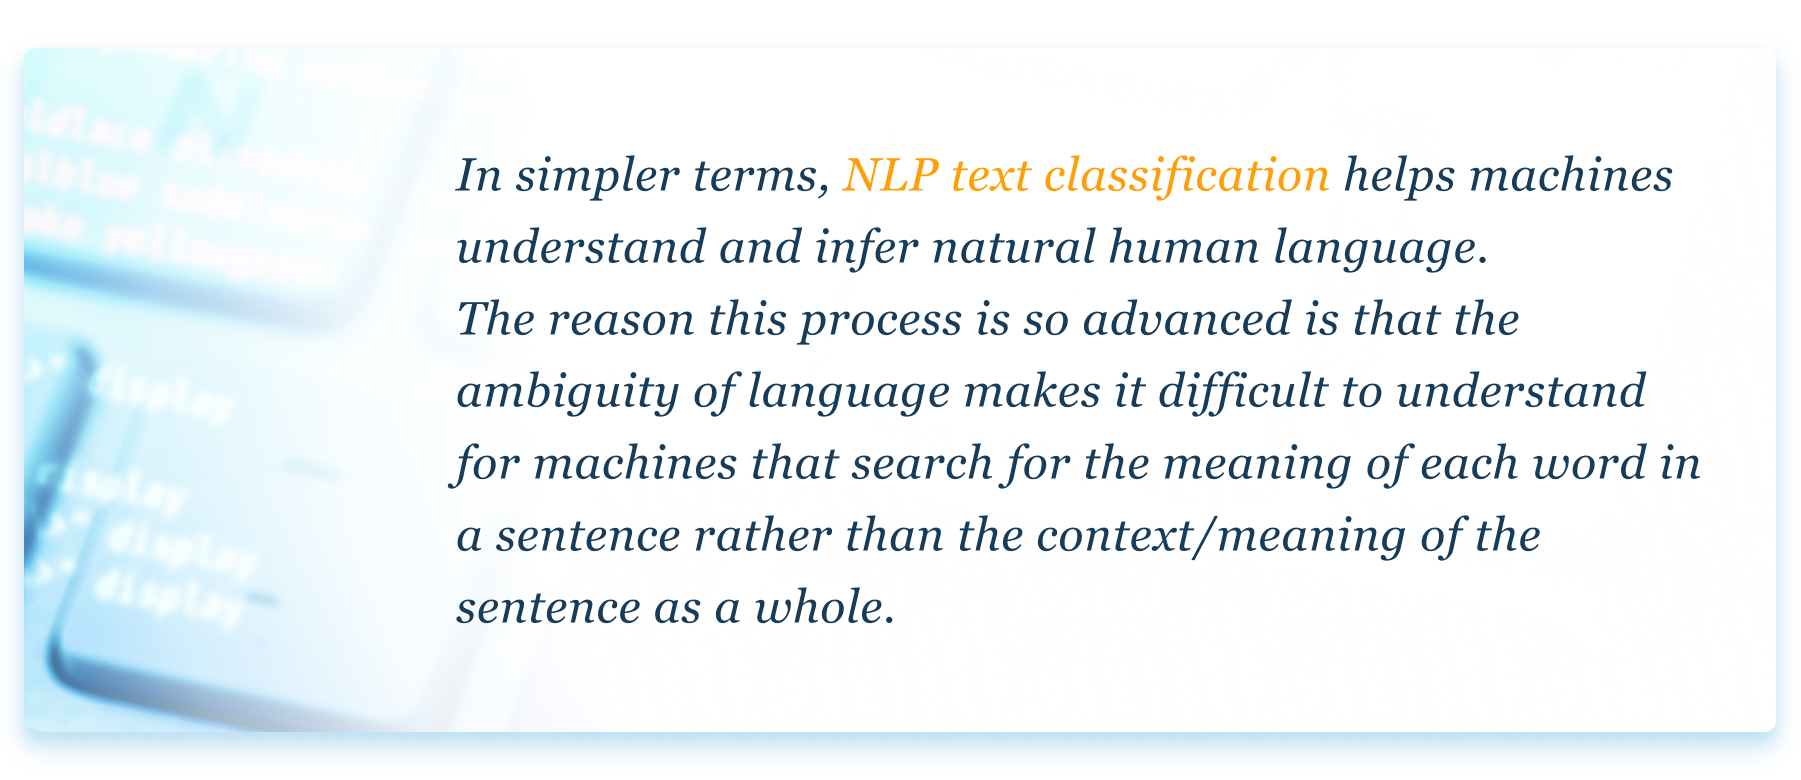 NLP text classification